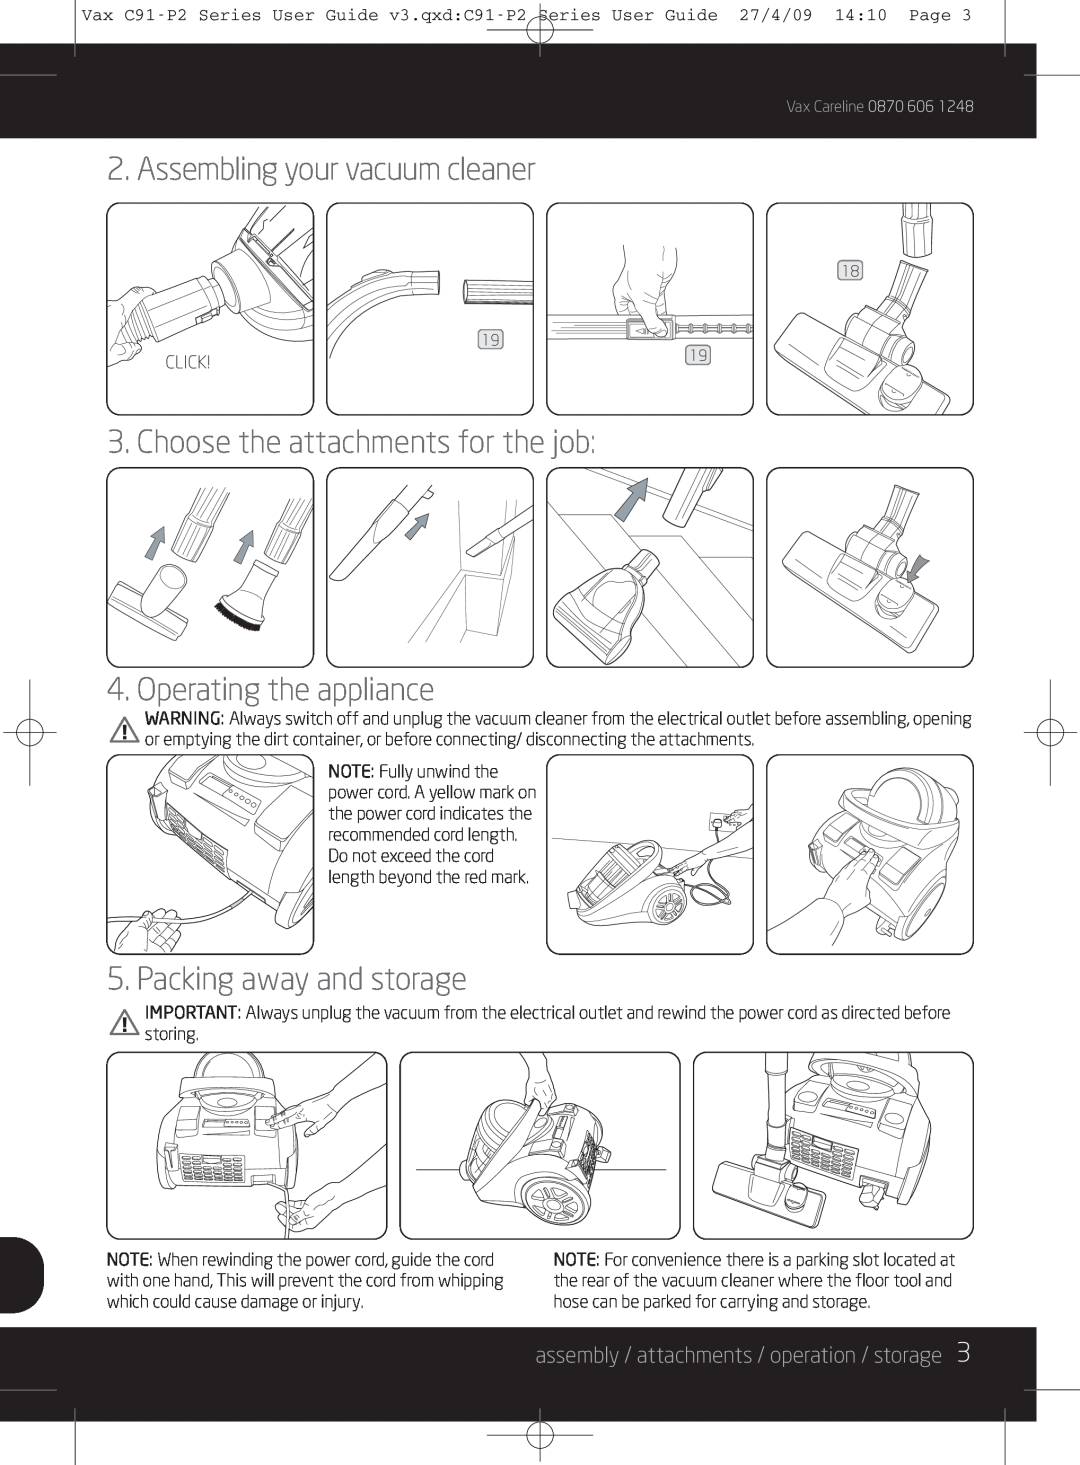 Vax C91-P2 instruction manual Assembling your vacuum cleaner, Choose the attachments for the job, Operating the appliance 